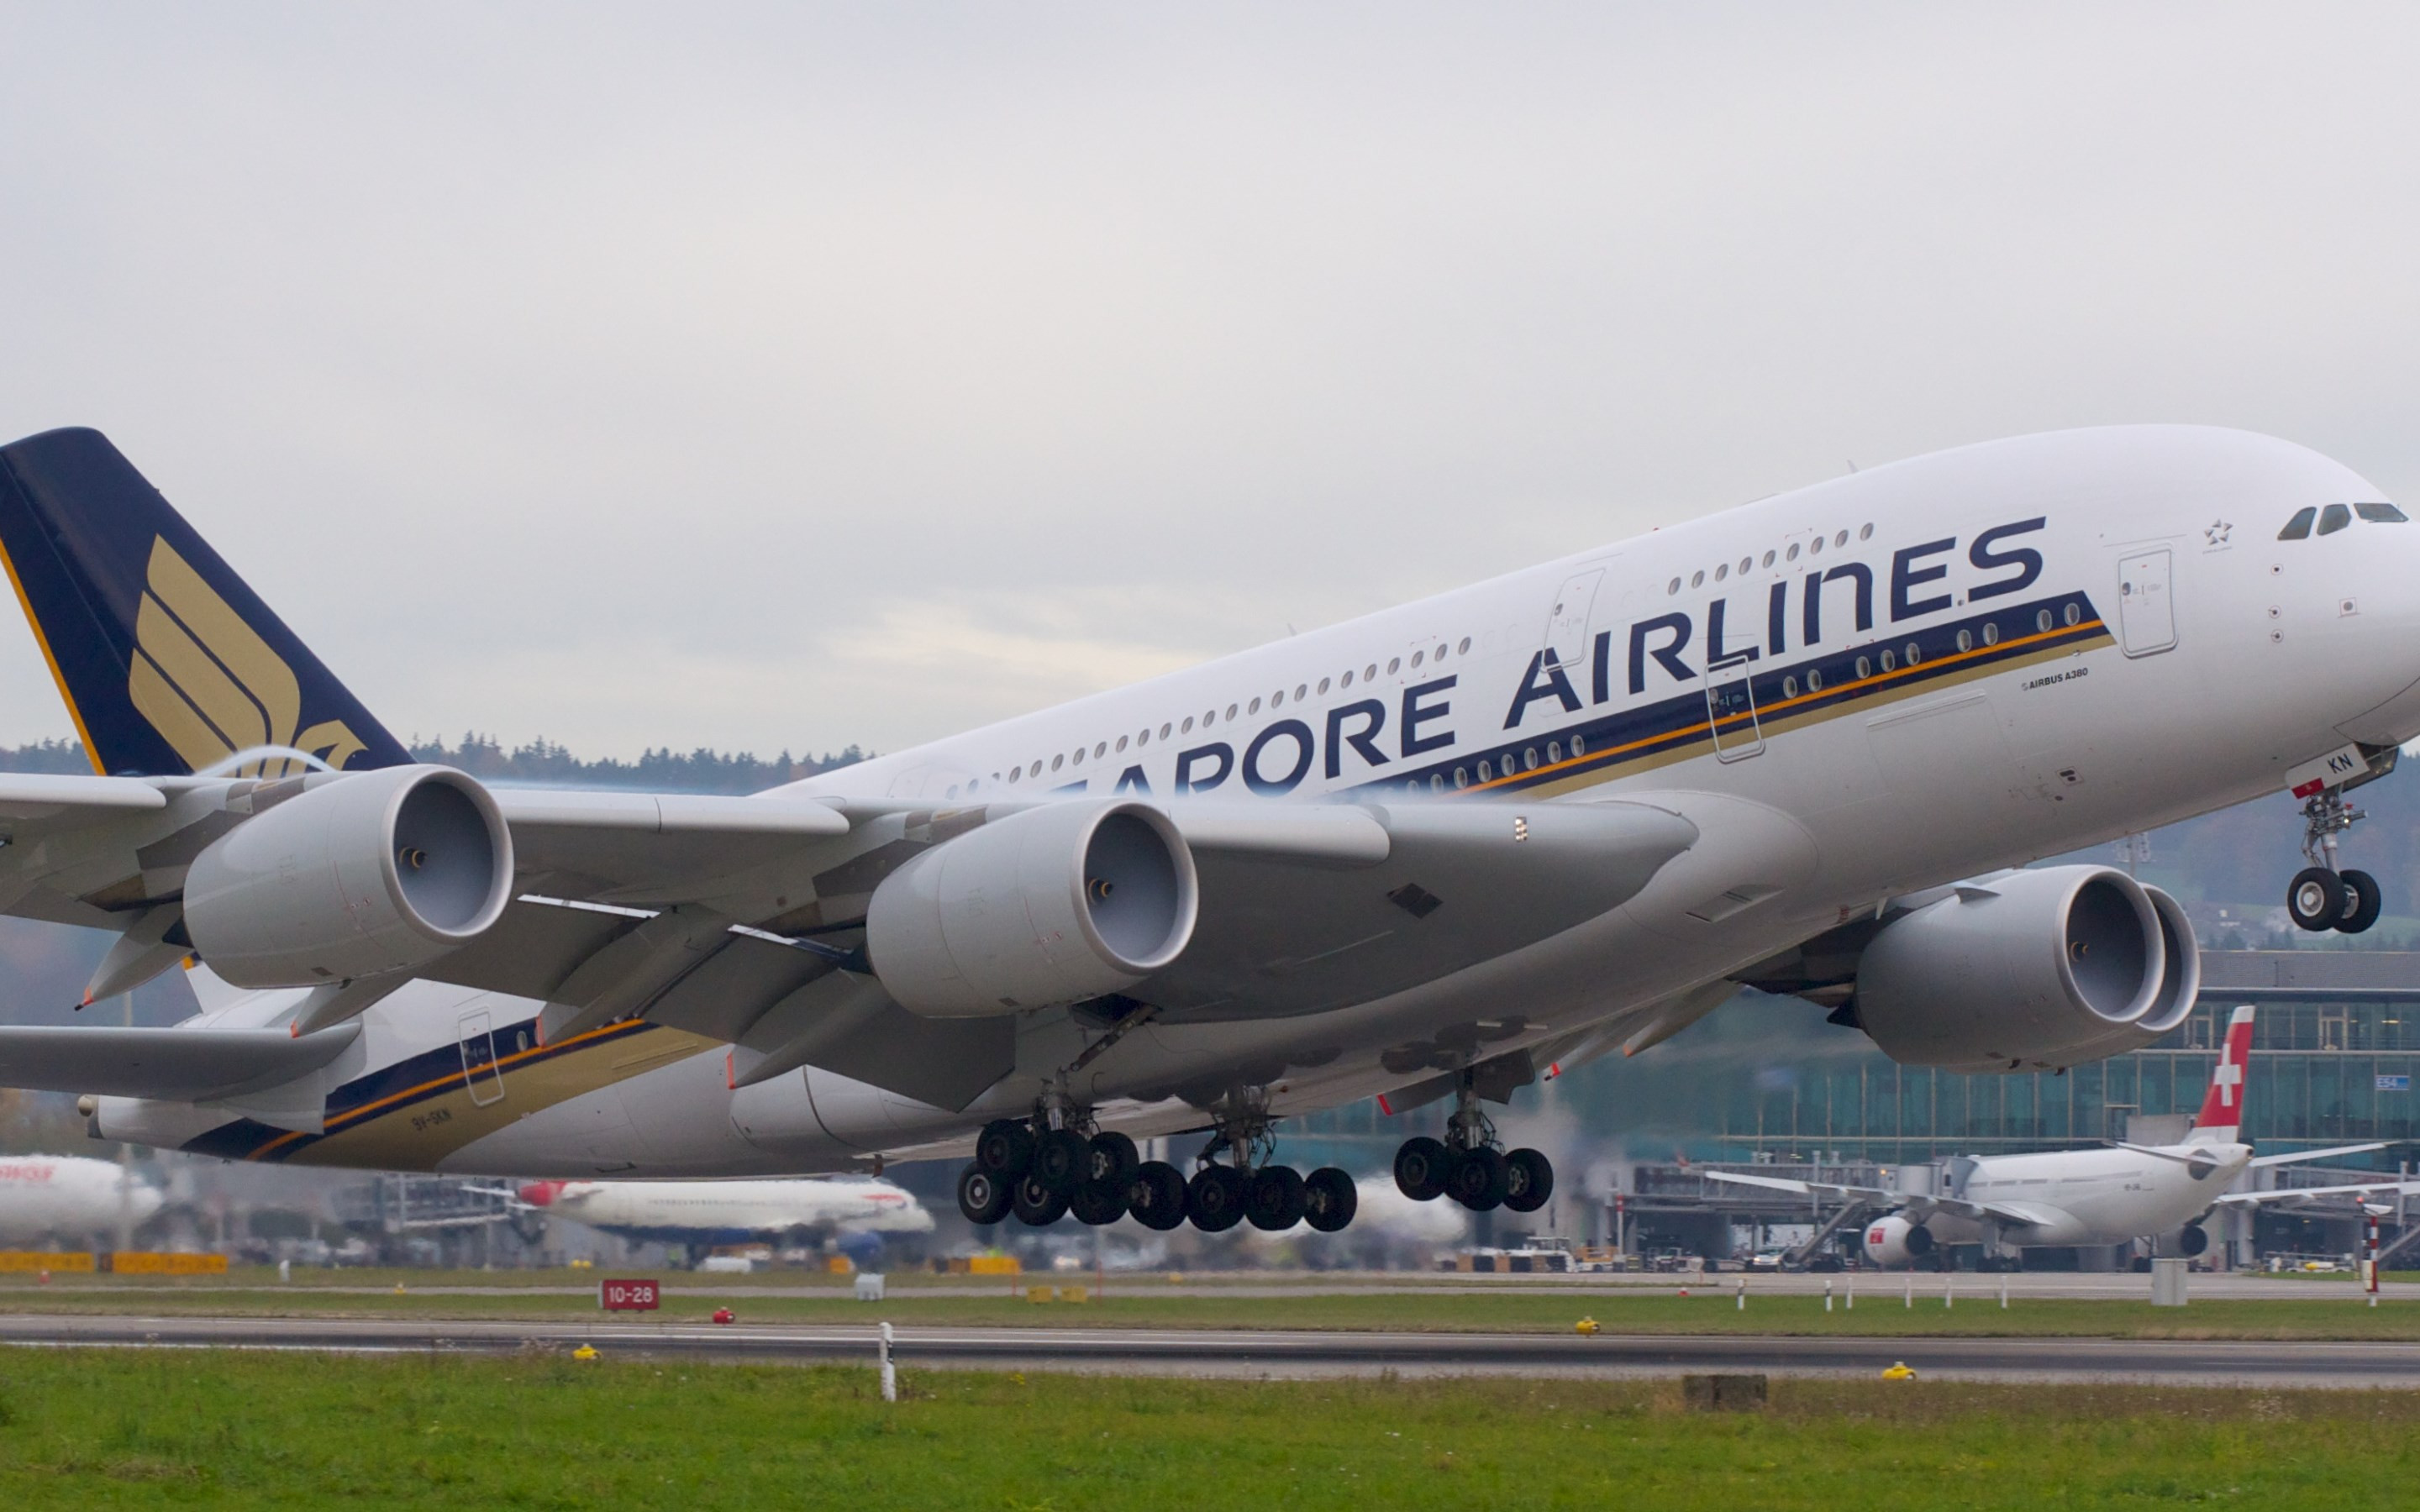 Passenger airplane from Singapore airlines wallpaper 2880x1800